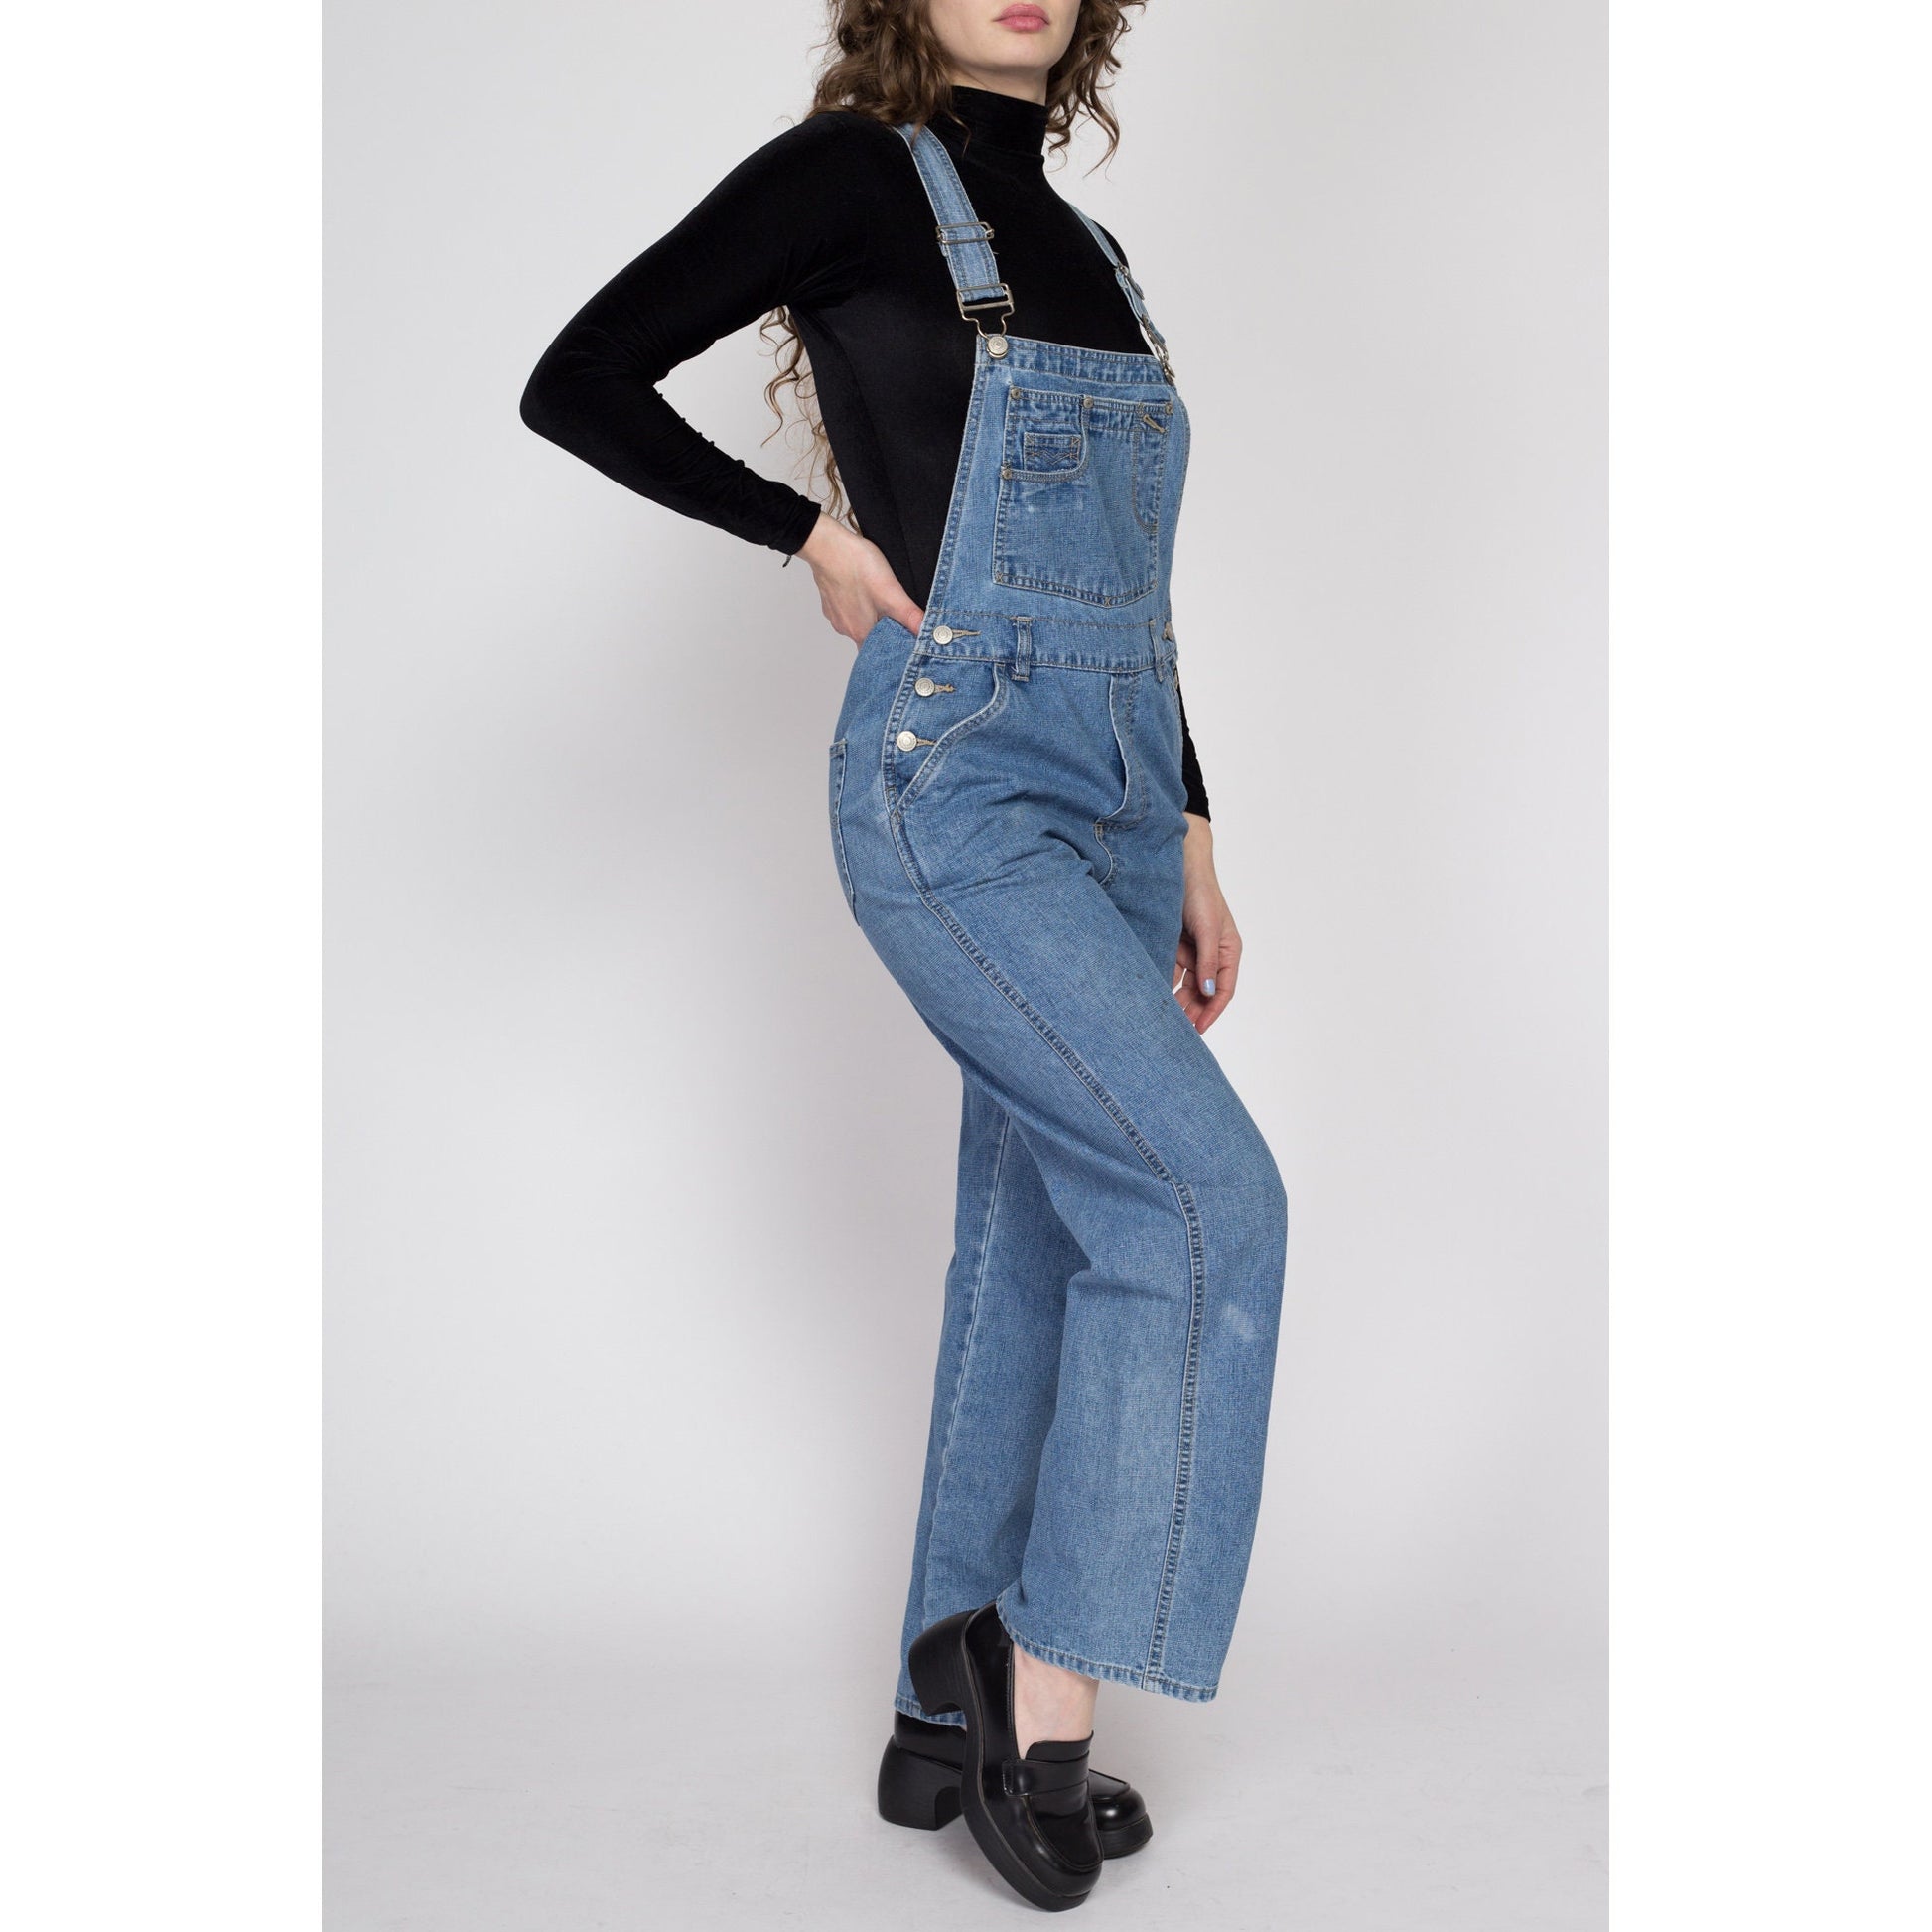 Cute vintage dungarees by the brand No Boundaries, - Depop